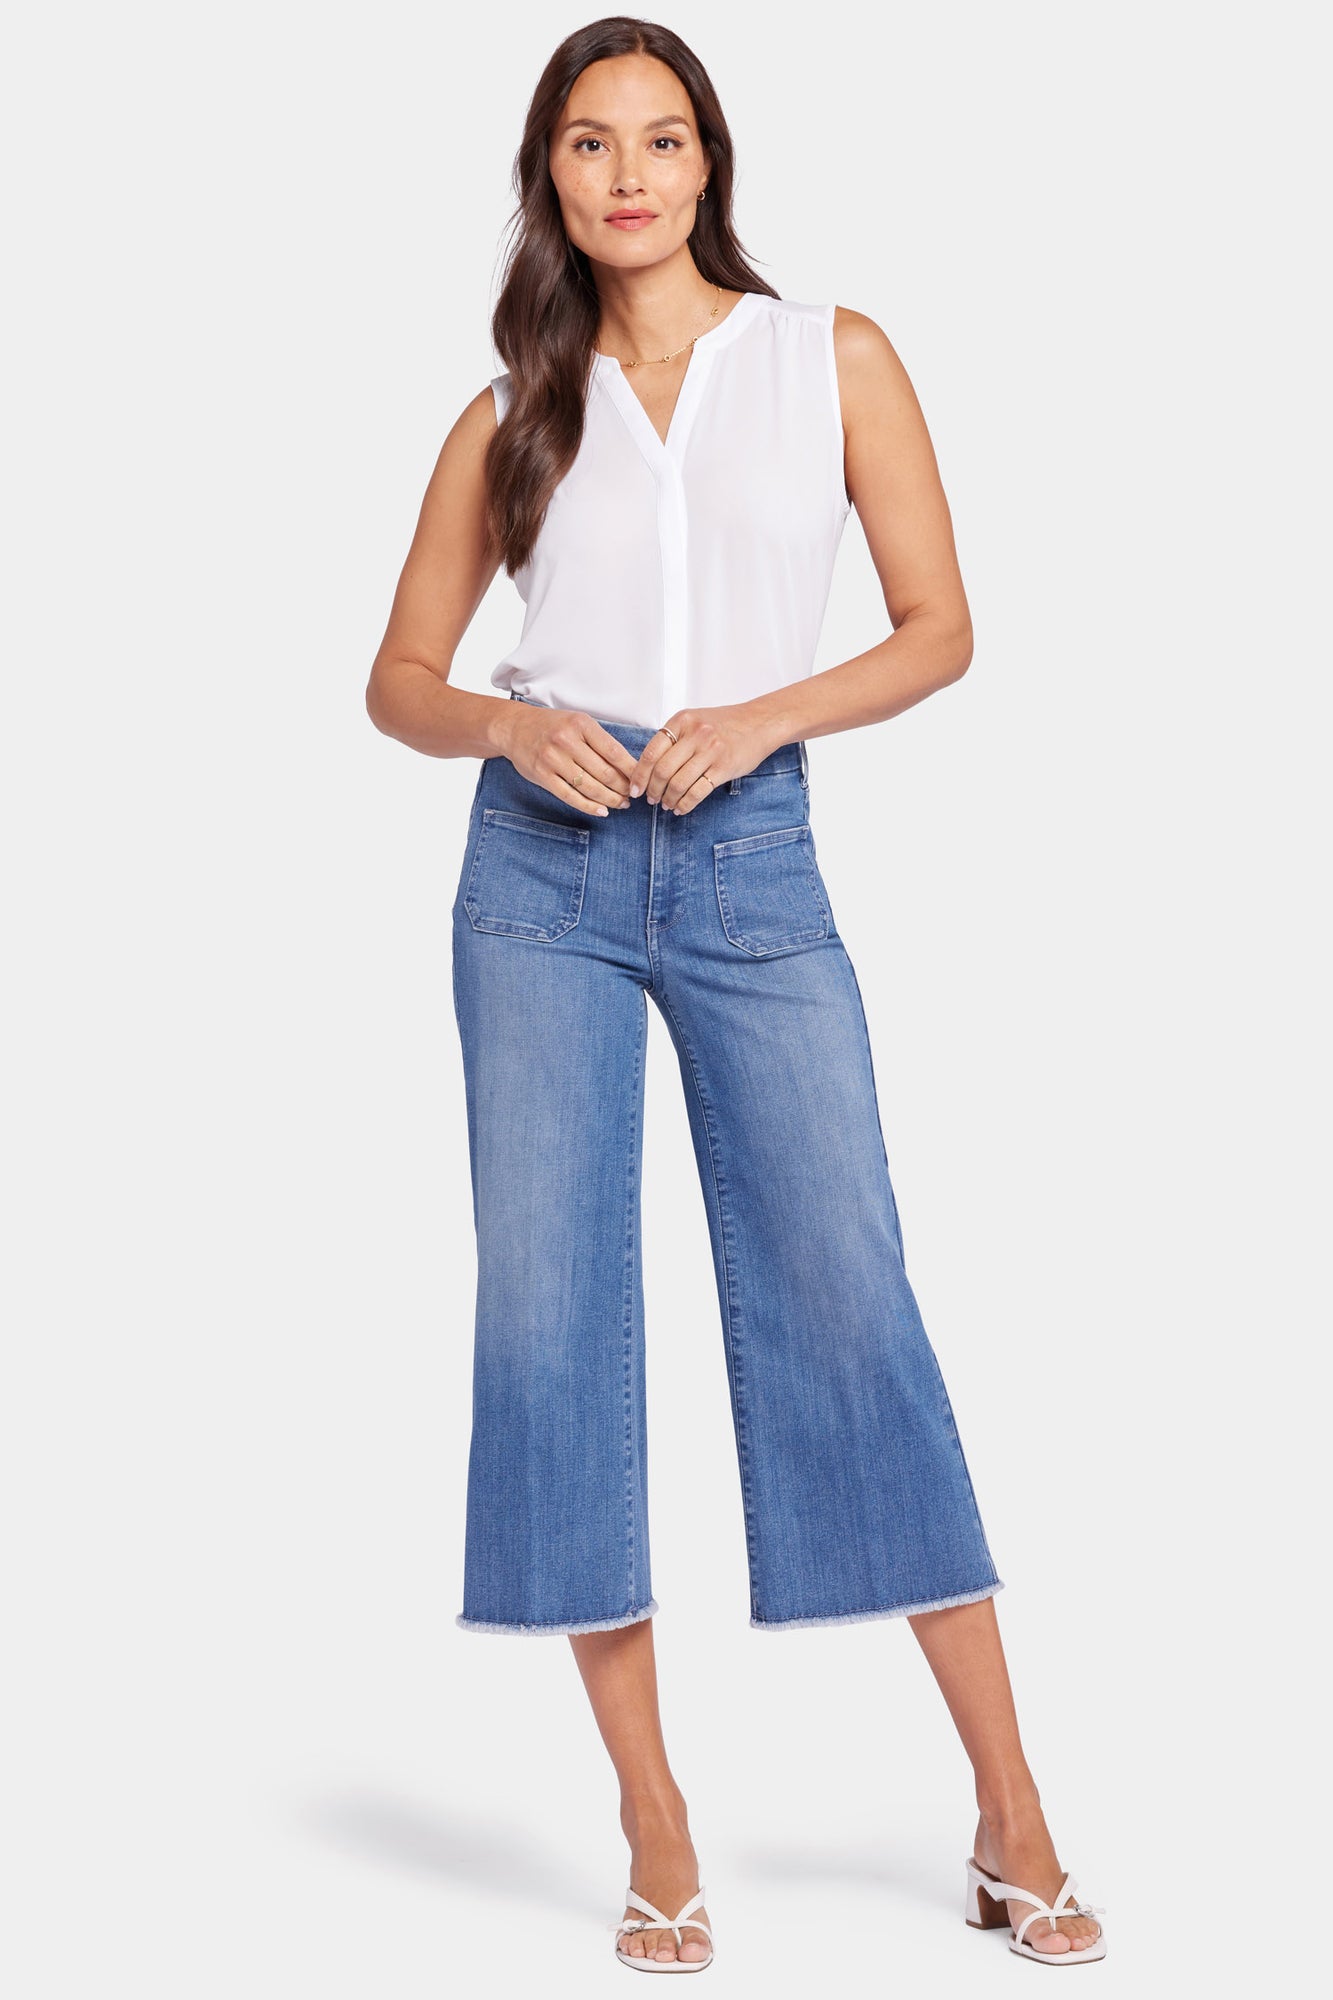 NYDJ Patchie Wide Leg Capri Jeans In Petite With Frayed Hems - Compass